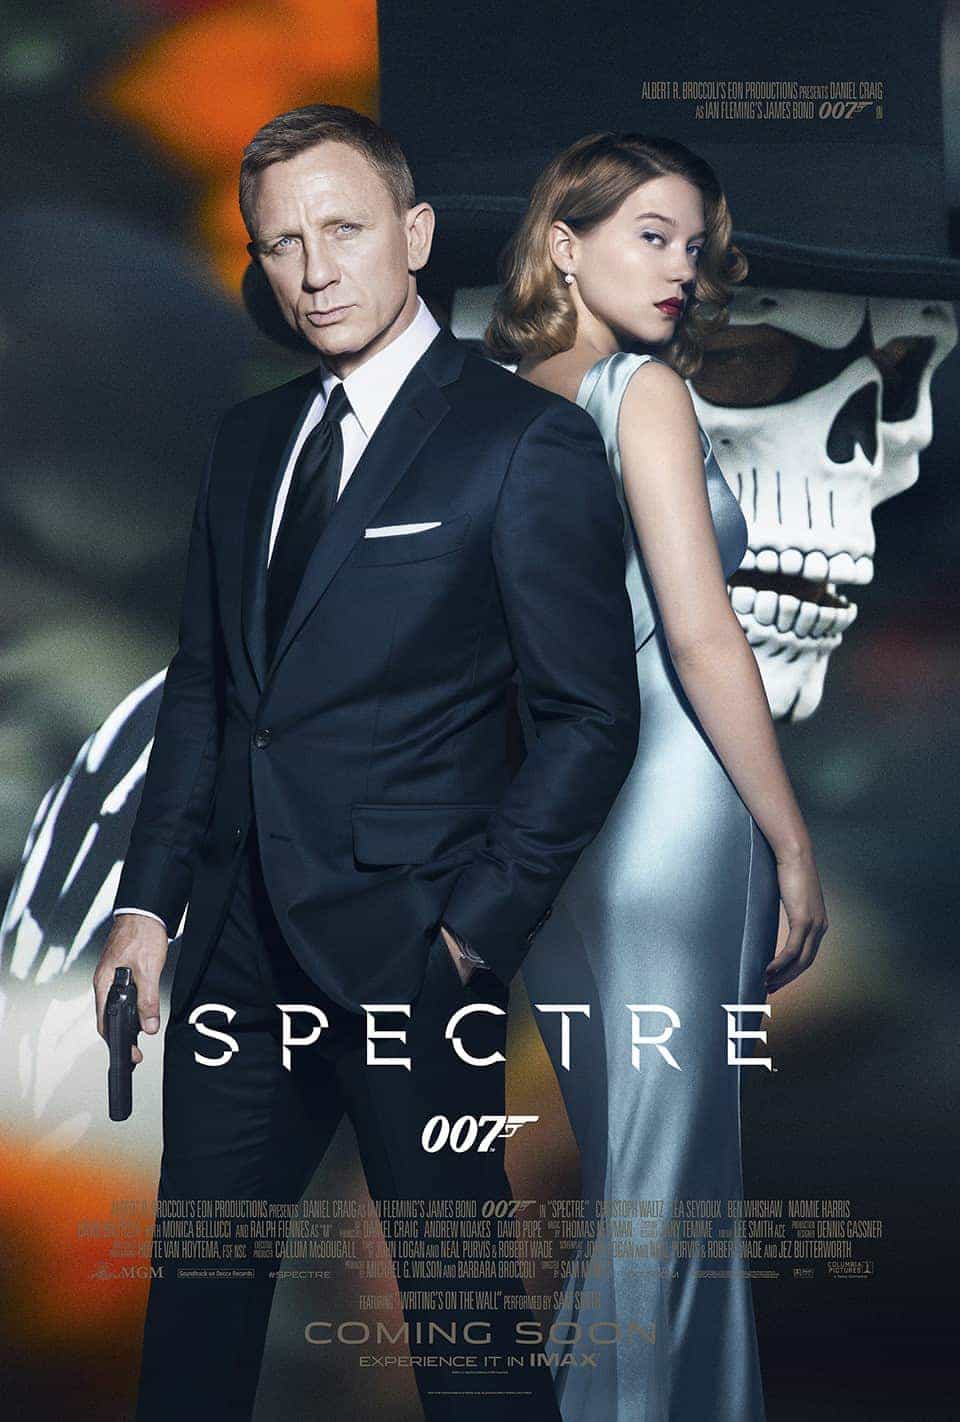 World Box Office Report Weekending 15th November 2015:  Spectre continues to dominate